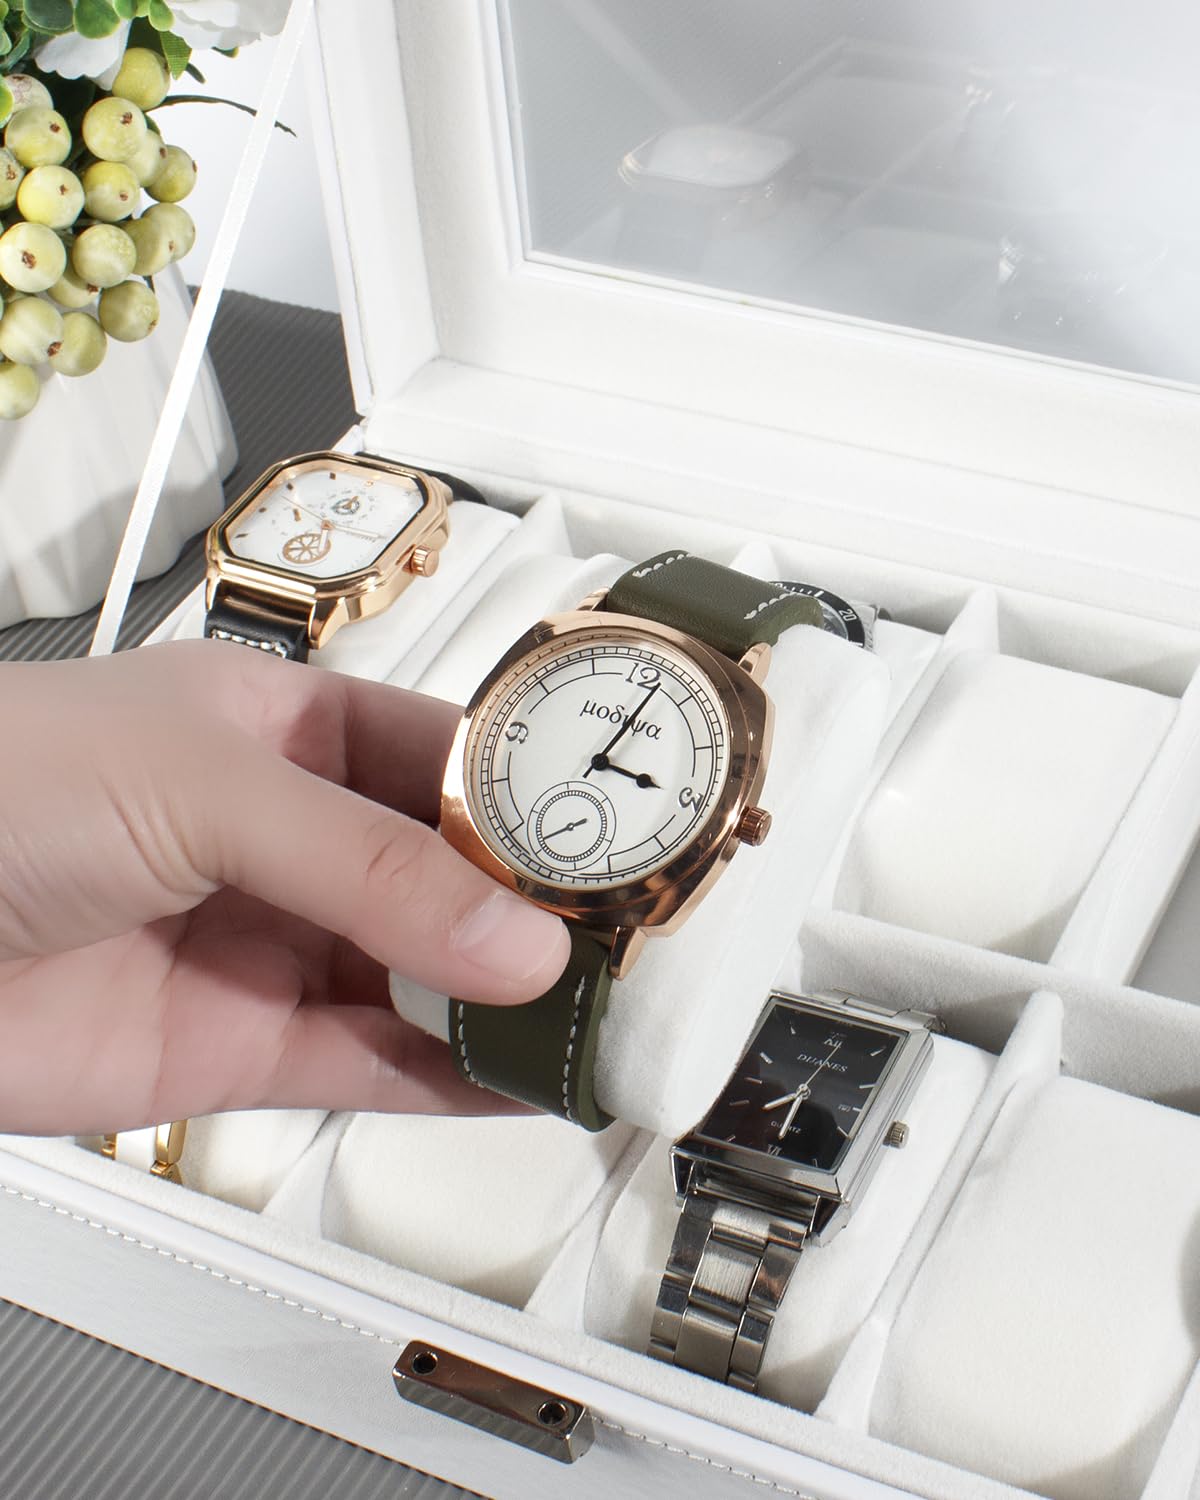 GUKA Watch Box 12 Slot Case Real Glass Organizer Watch Case with Removable Watch Pillow, White Synthetic Leather Watch Display